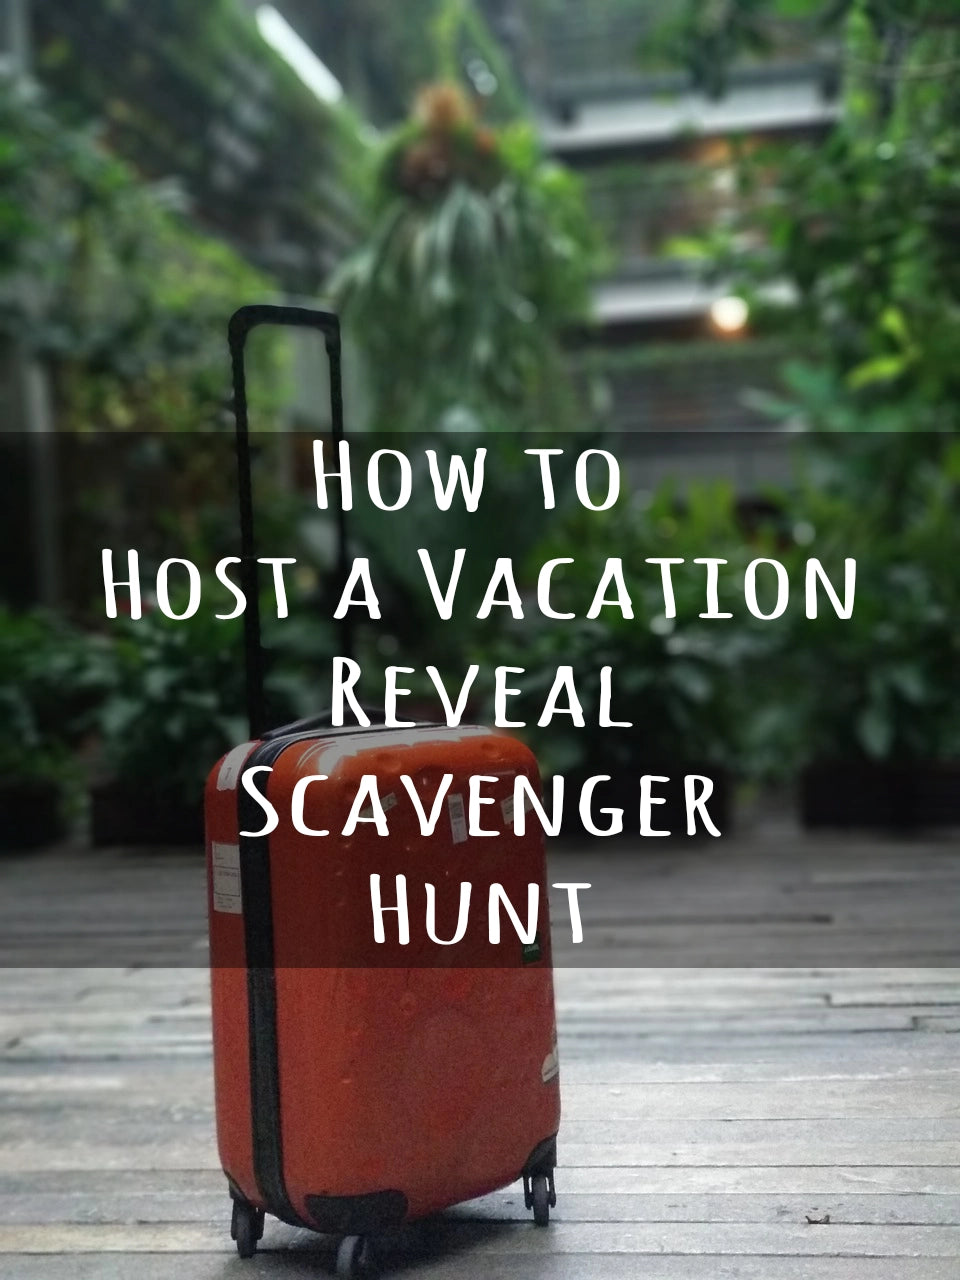 How to plan an Amazing Surprise Vacation Scavenger Hunt Reveal in 8 Steps